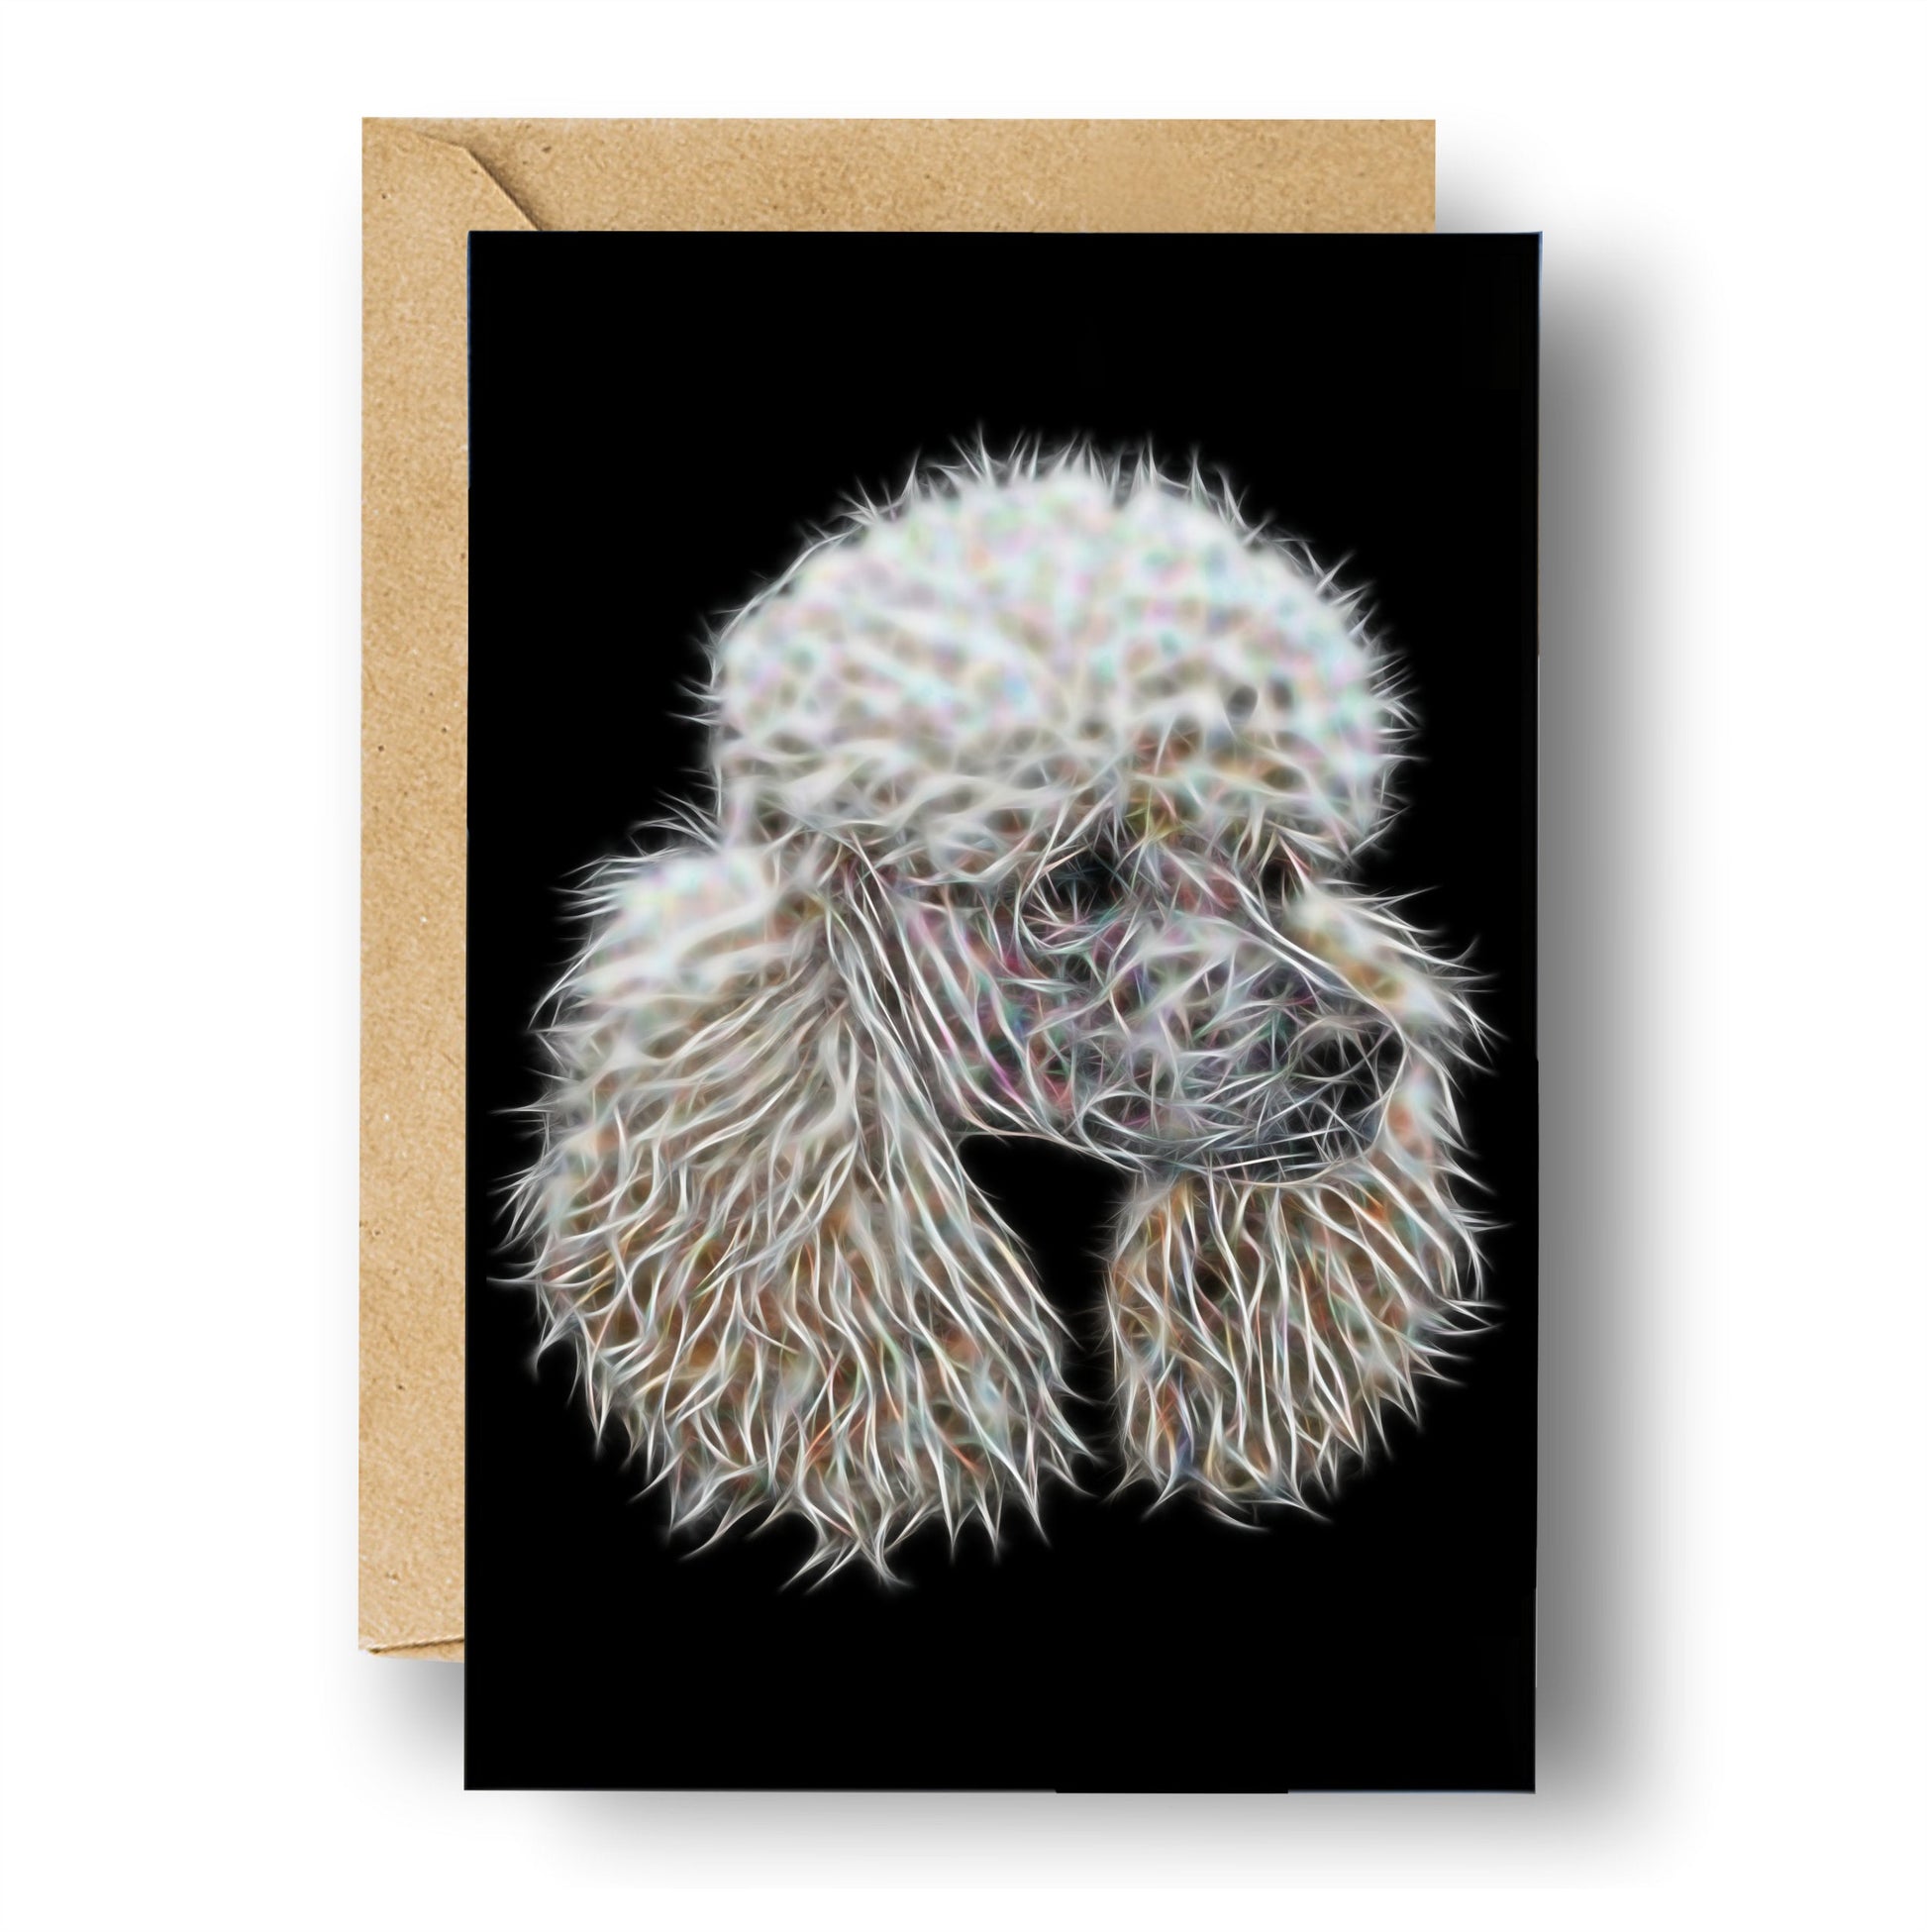 White Poodle Blank Birthday Greeting Card with Stunning Fractal Art Design